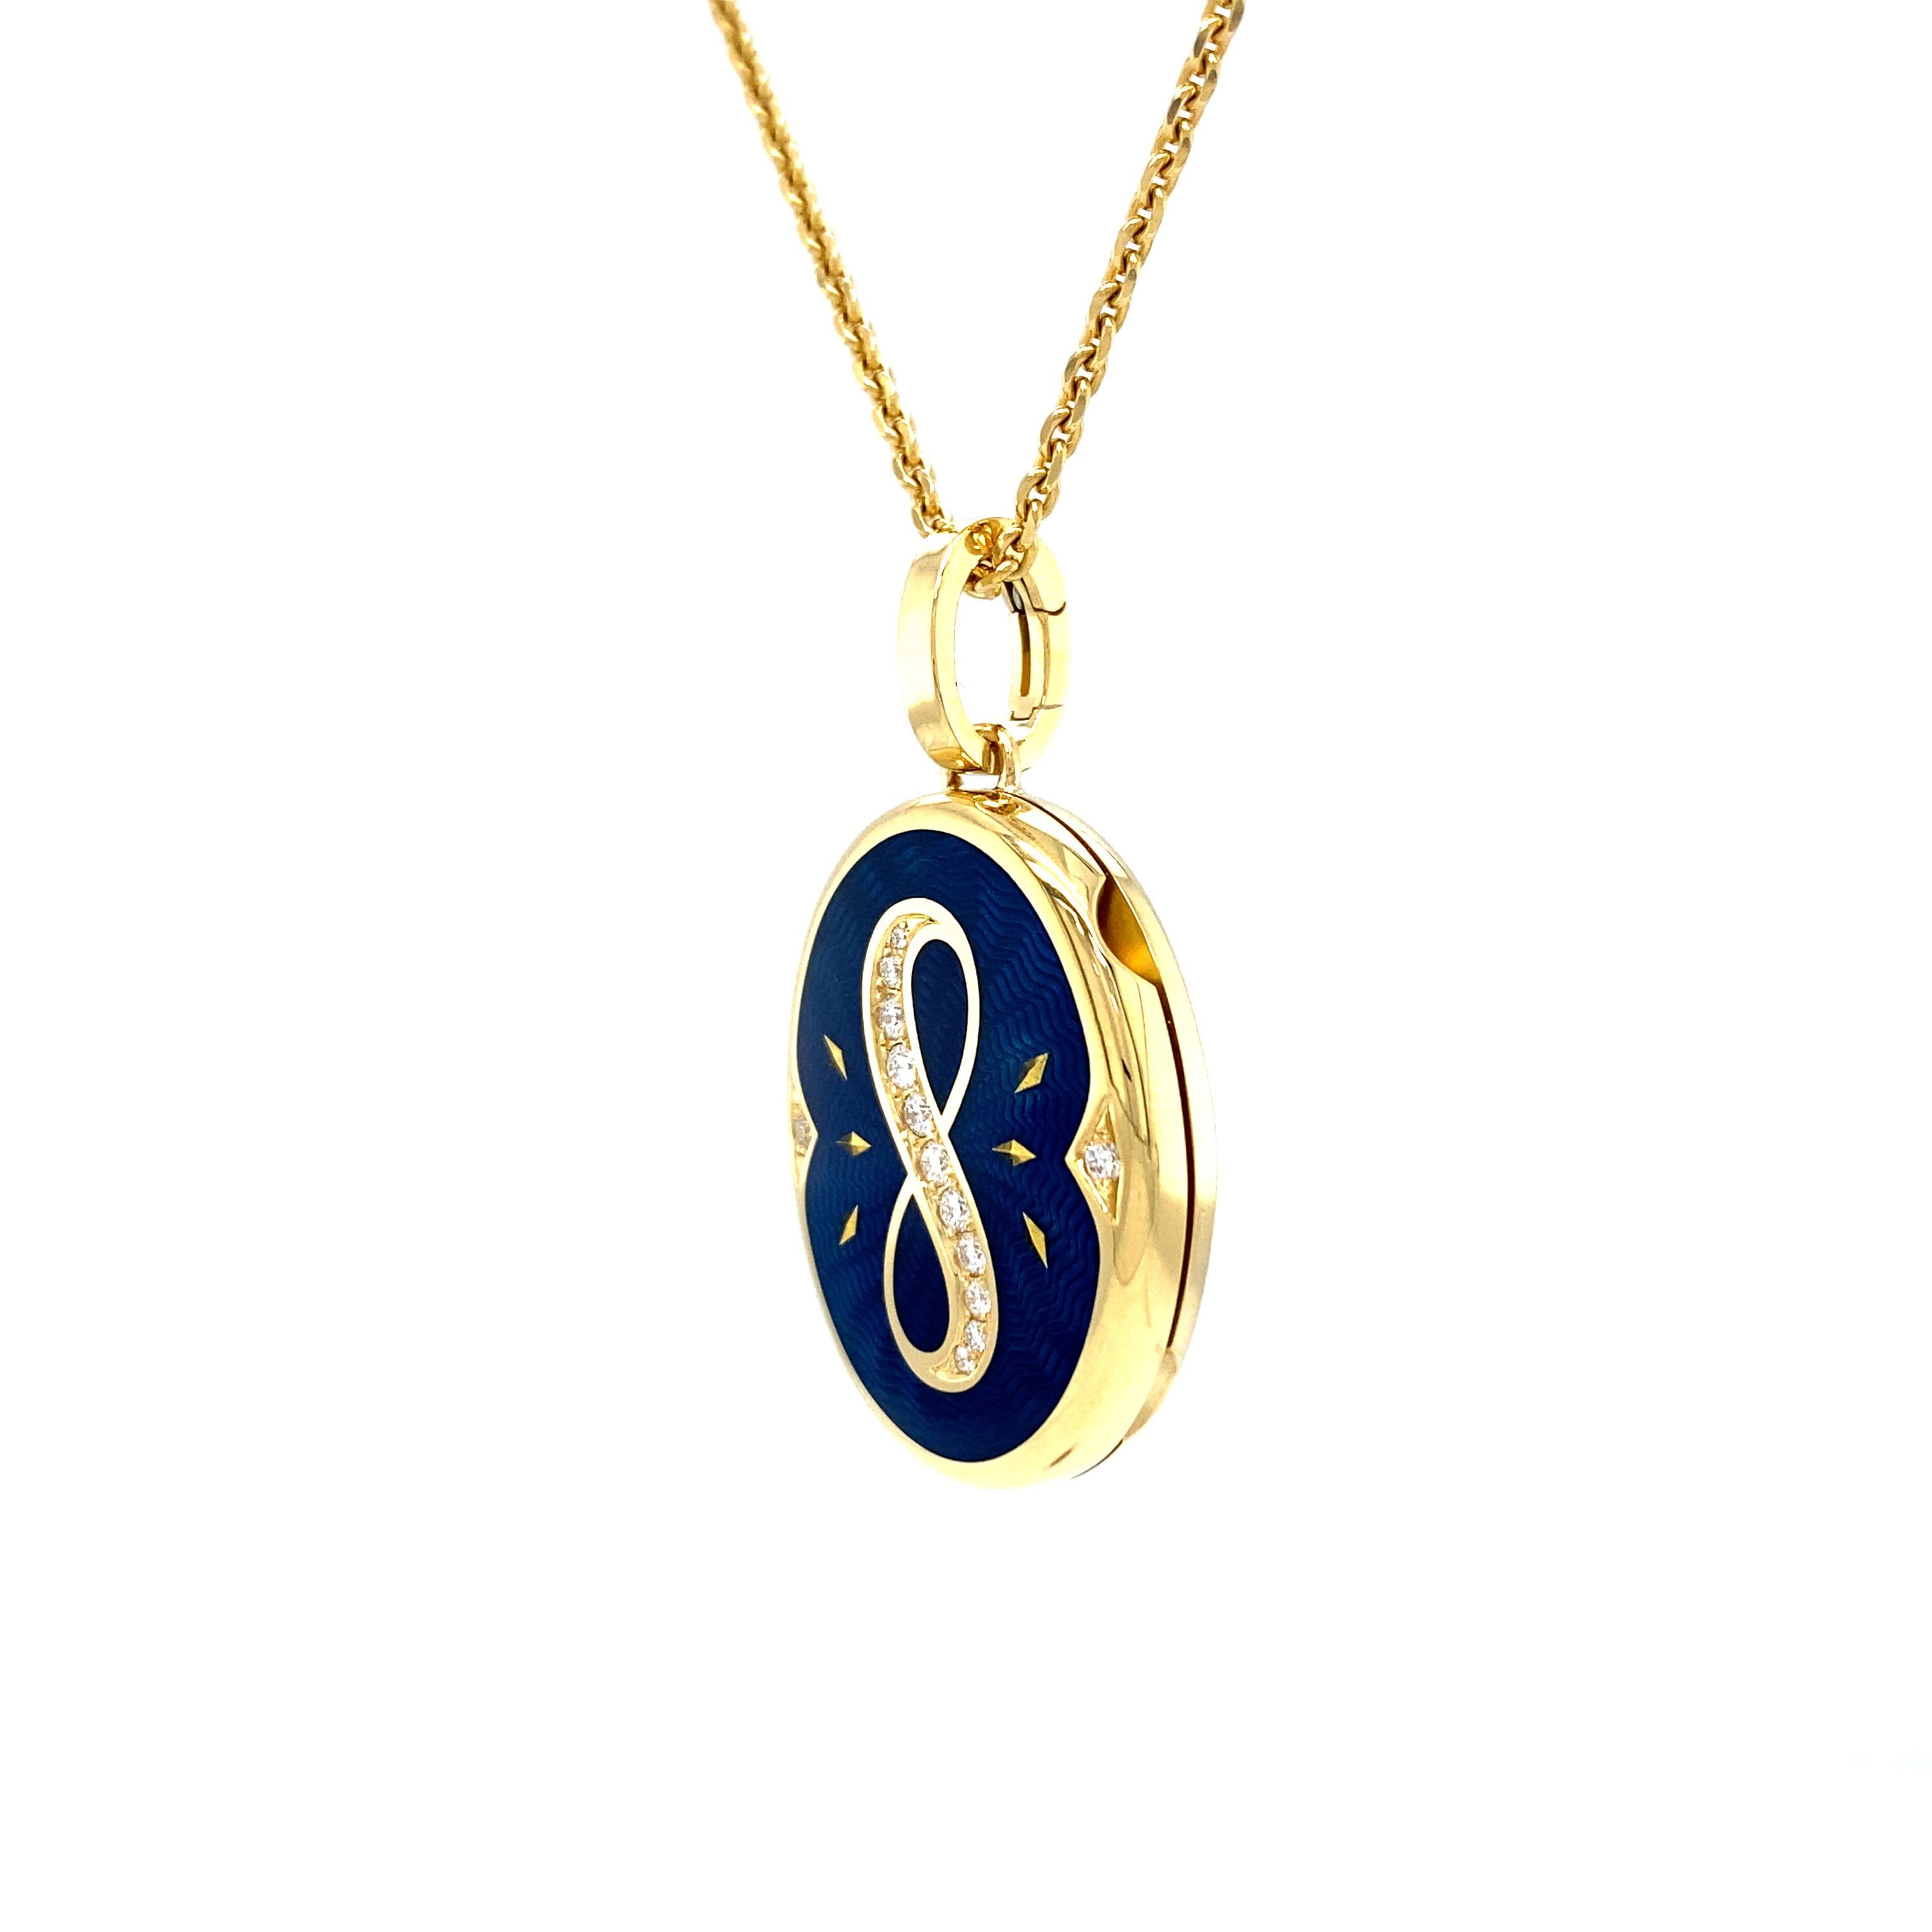 Victor Mayer customizable oval locket pendant with infinity symbol, 18k yellow gold, Victoria Collection, translucent petrol blue vitreous enamel, guilloche, gold paillons, 13 diamonds, total 0.22 ct, G VS brilliant cut, measurements app. 17.0 mm x